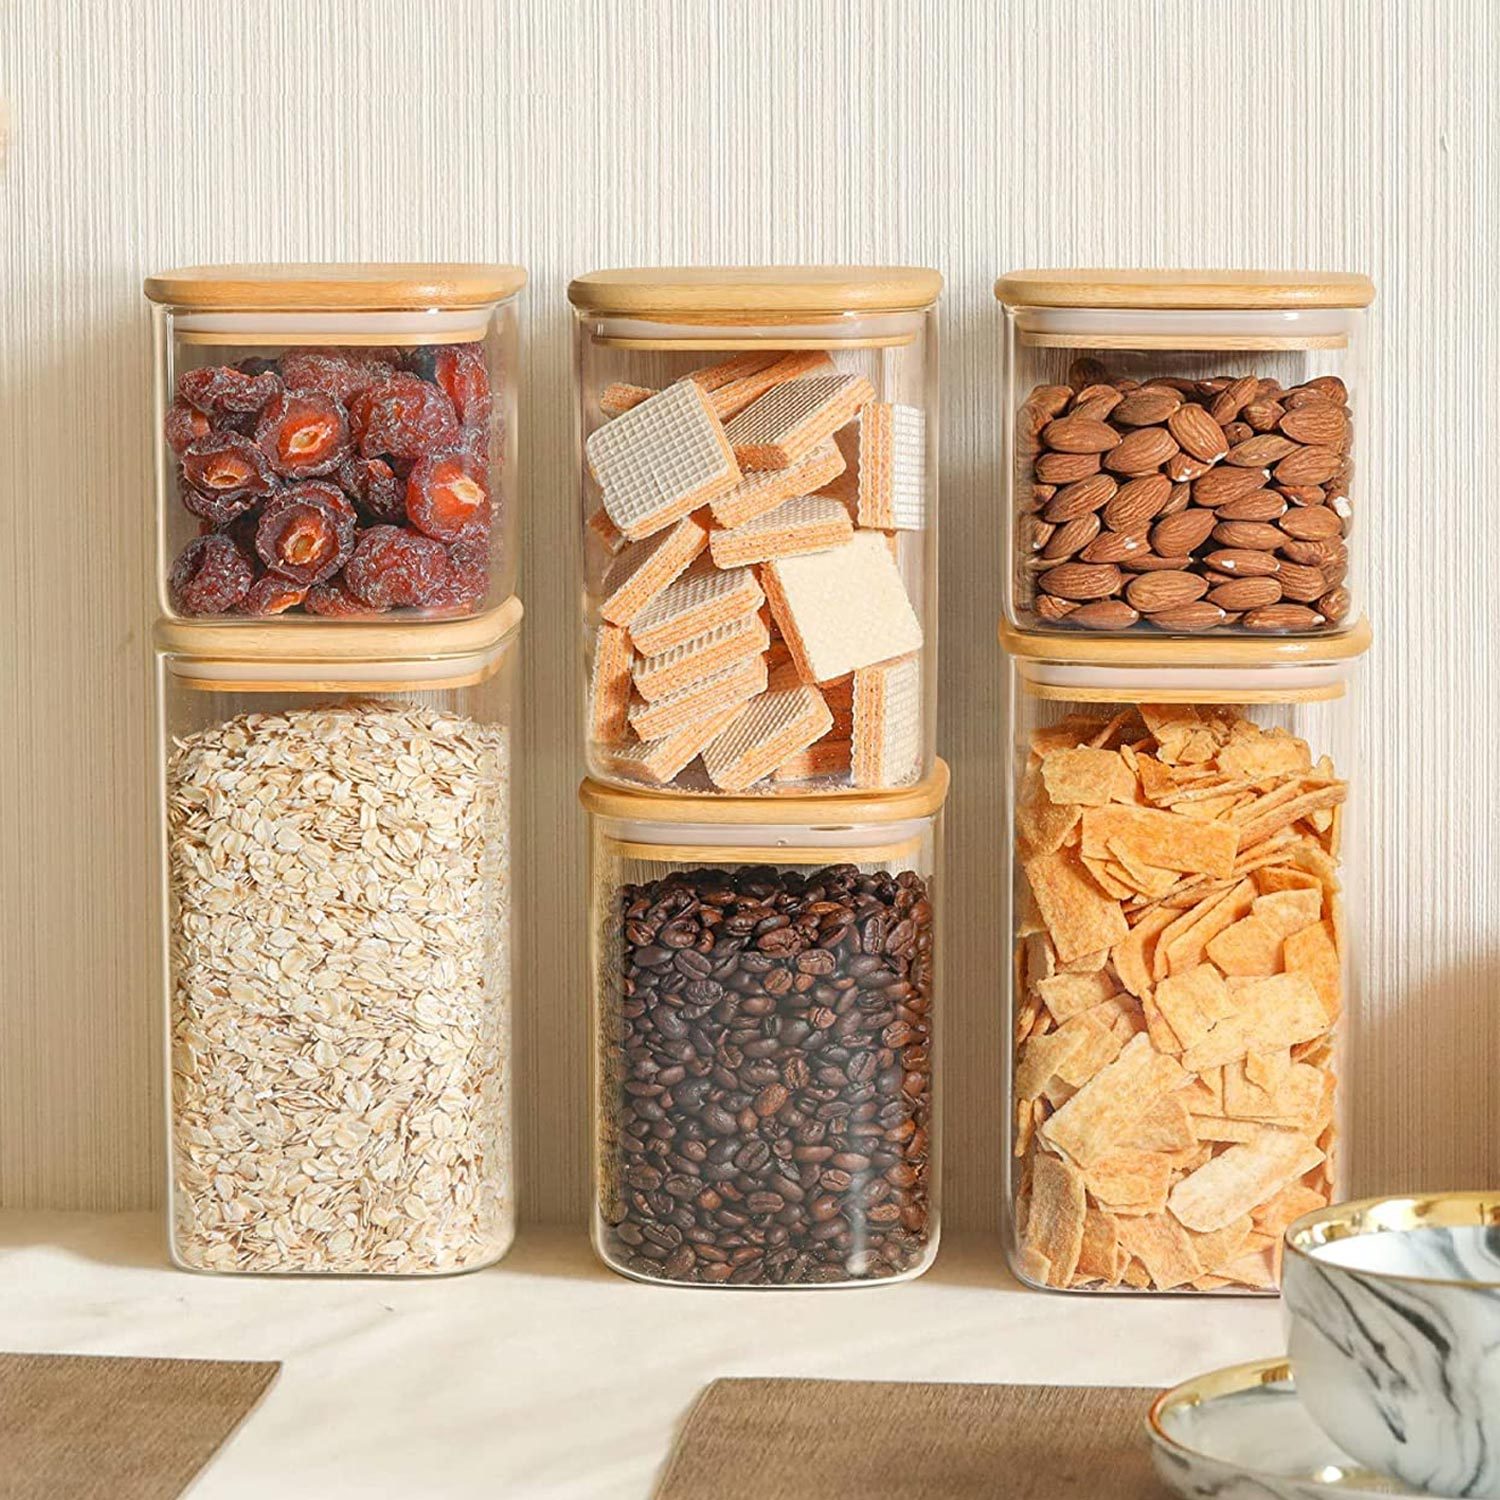 The Best Glass Food Storage Containers for 2021